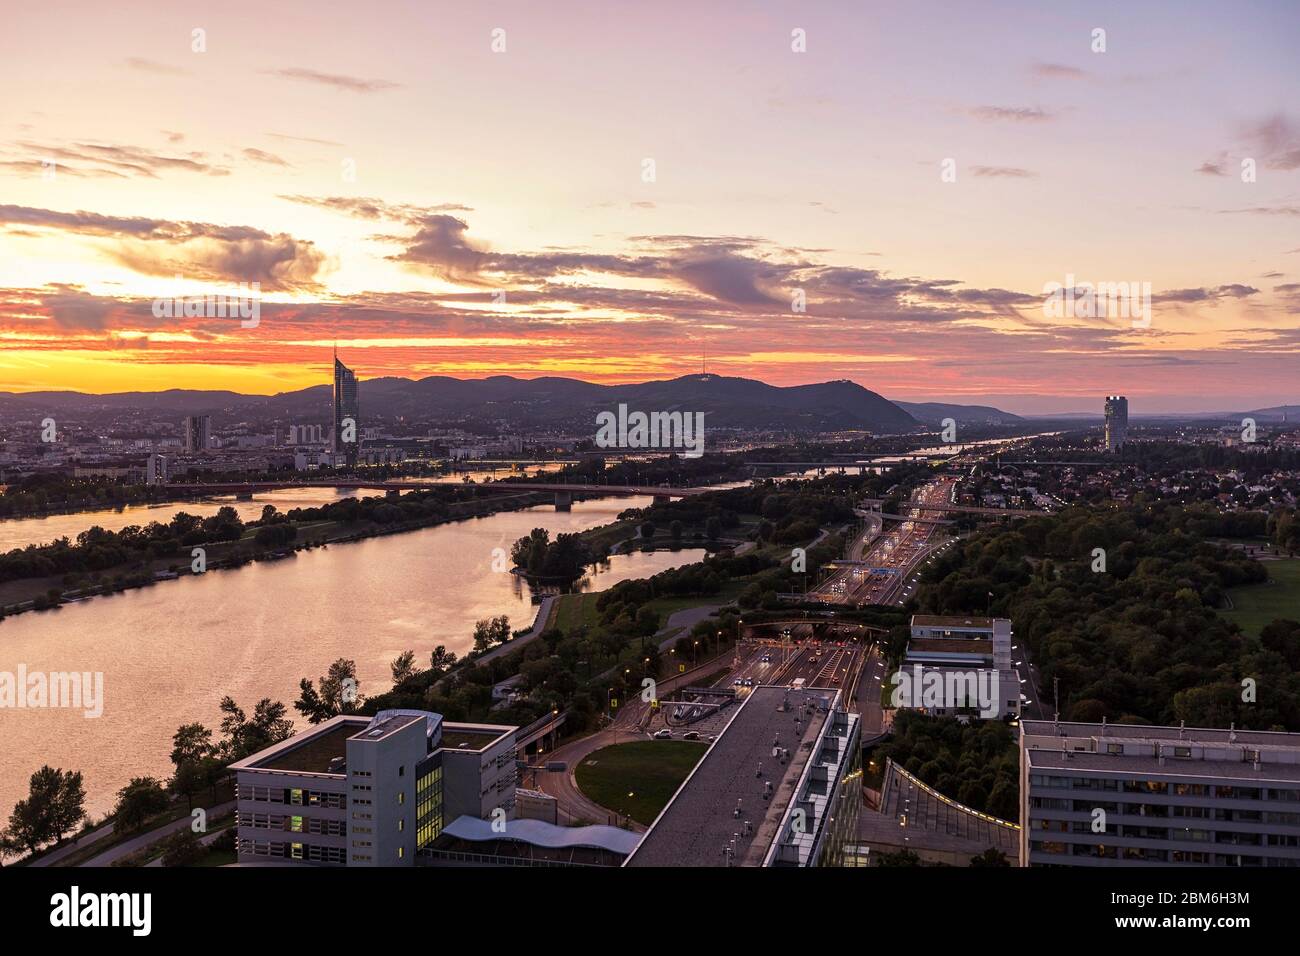 Dusk at the New Danube River with highway no. A22, the public recreation area called Danube Island, the Vienna Woods and Kahlenberg in the background Stock Photo